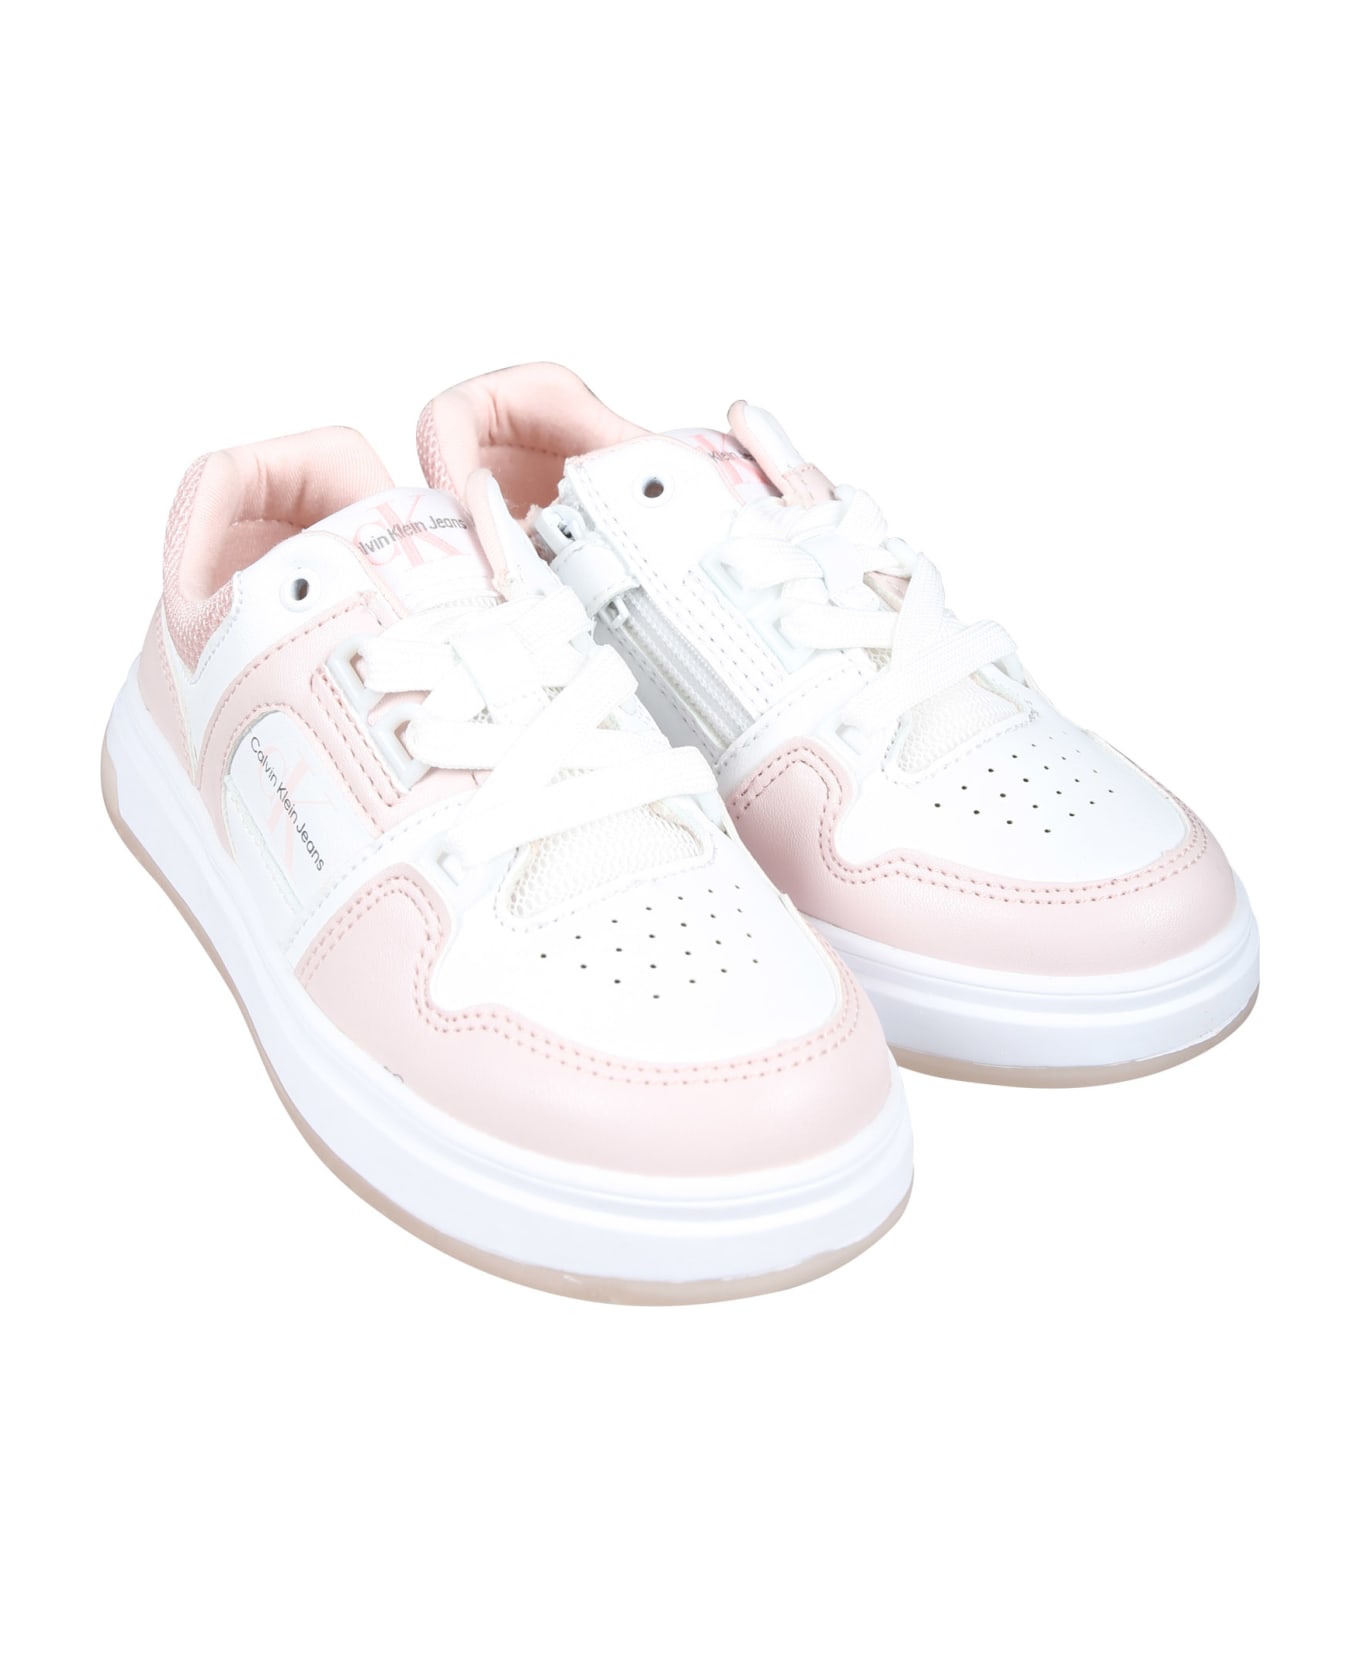 Calvin Klein Pink Sneakers For Girl With Logo - Pink